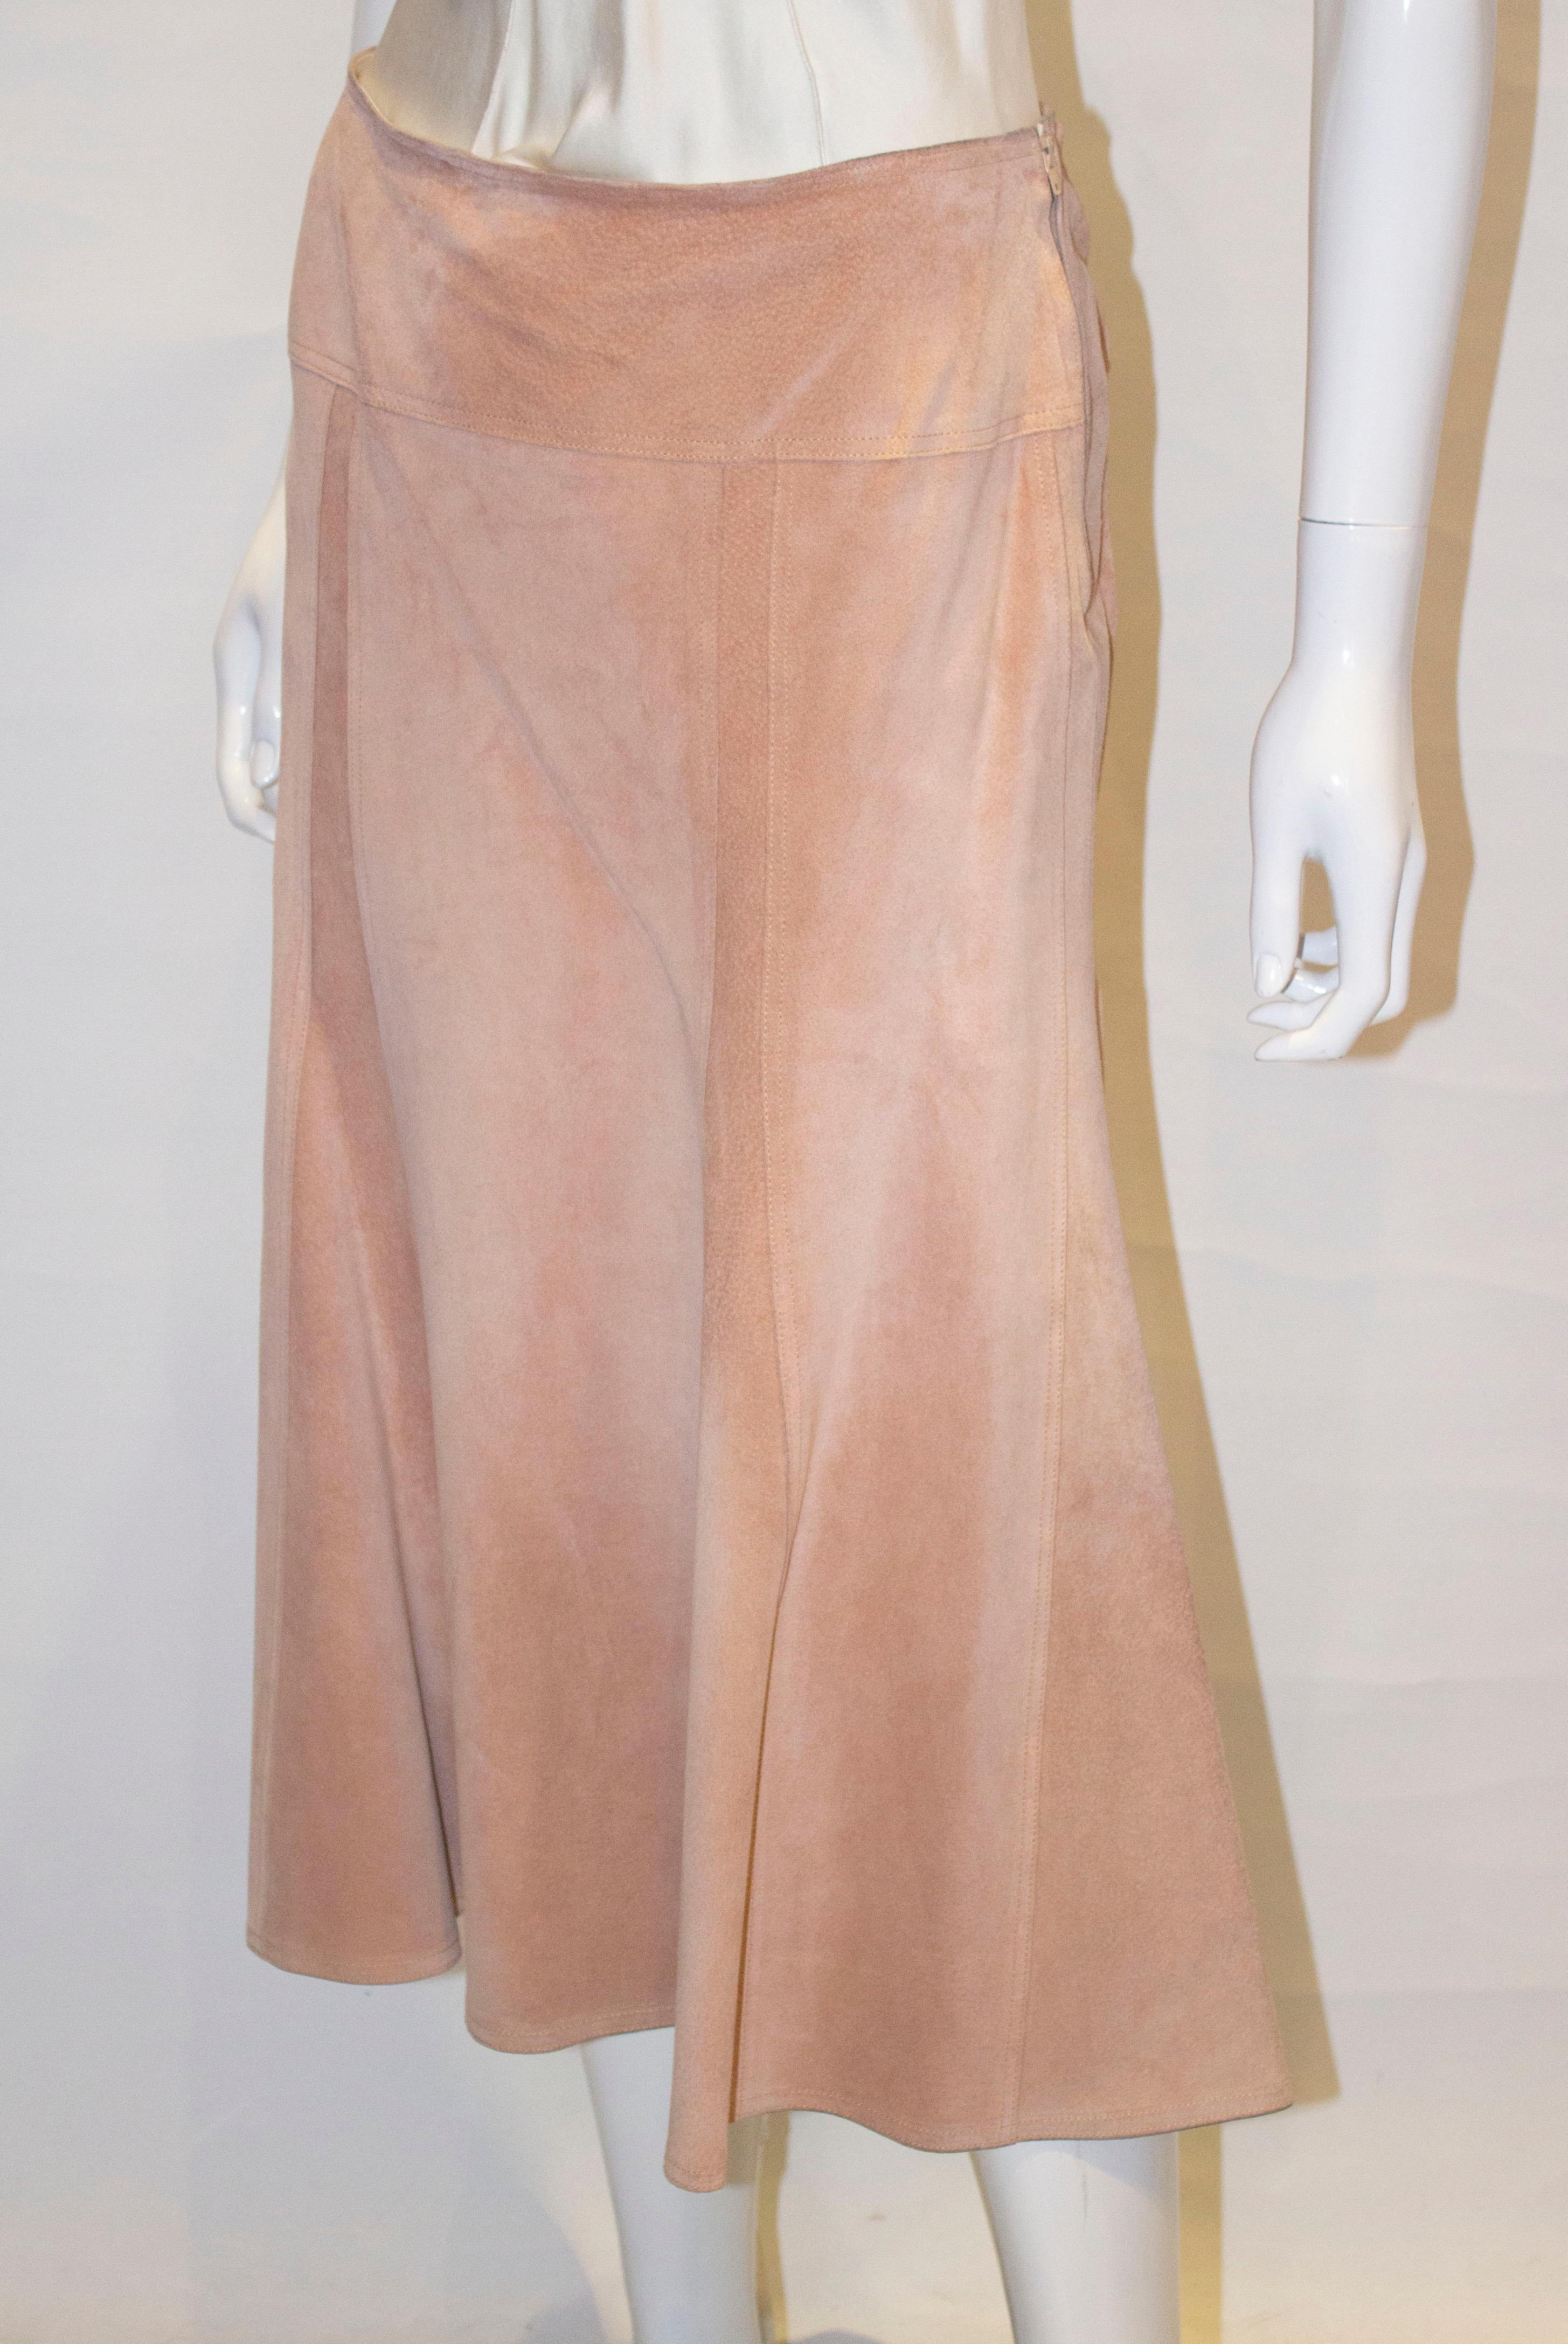 Vintage Jean Muir Suede Skirt In Good Condition For Sale In London, GB